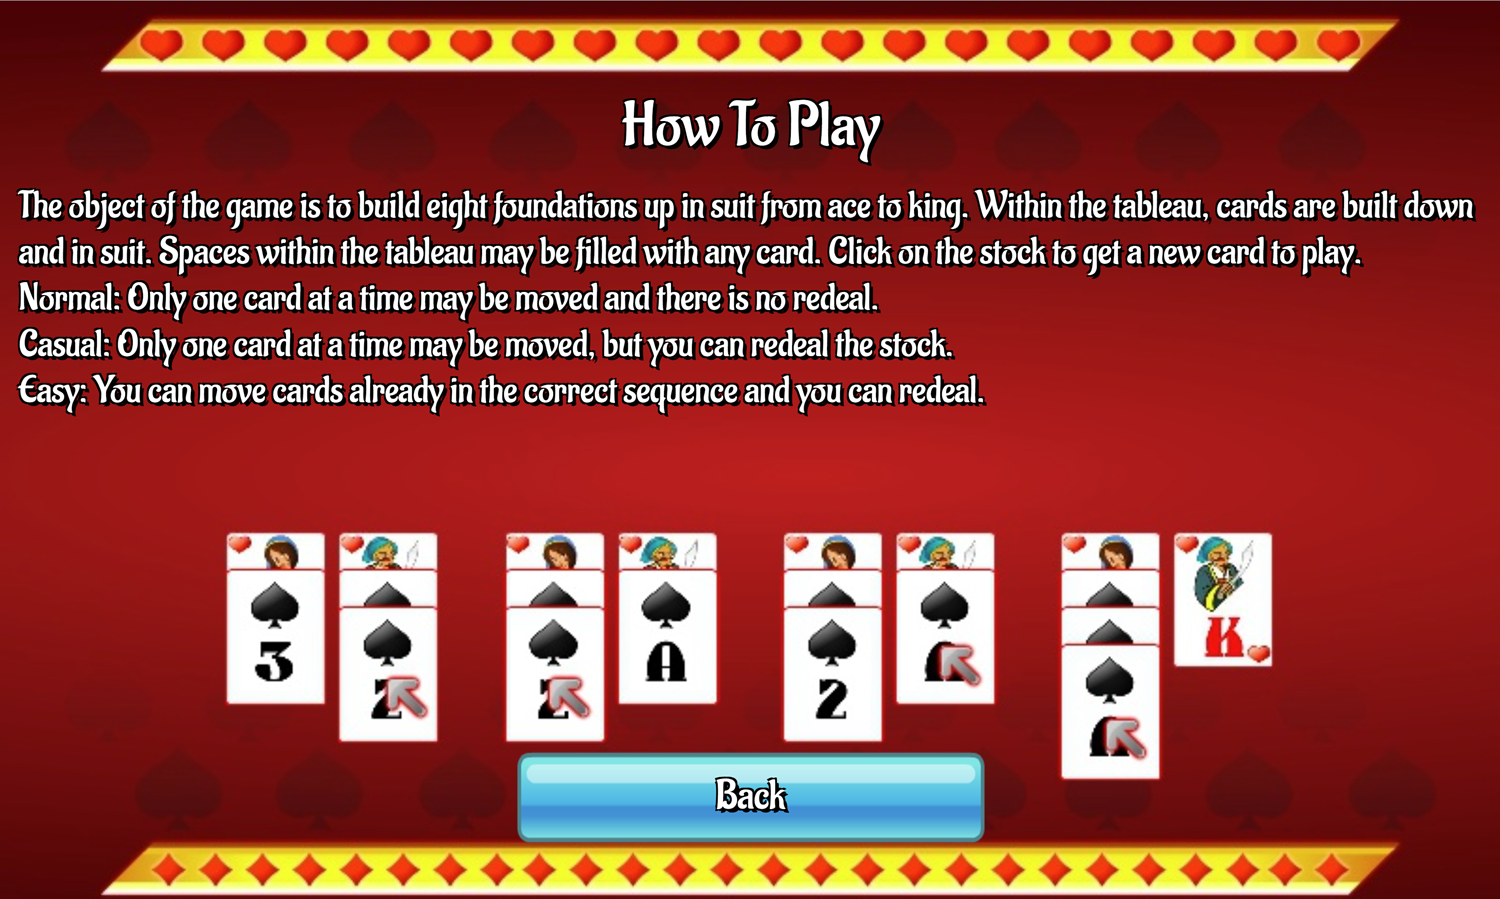 Forty Thieves Solitaire Game How to Play Screen Screenshot.